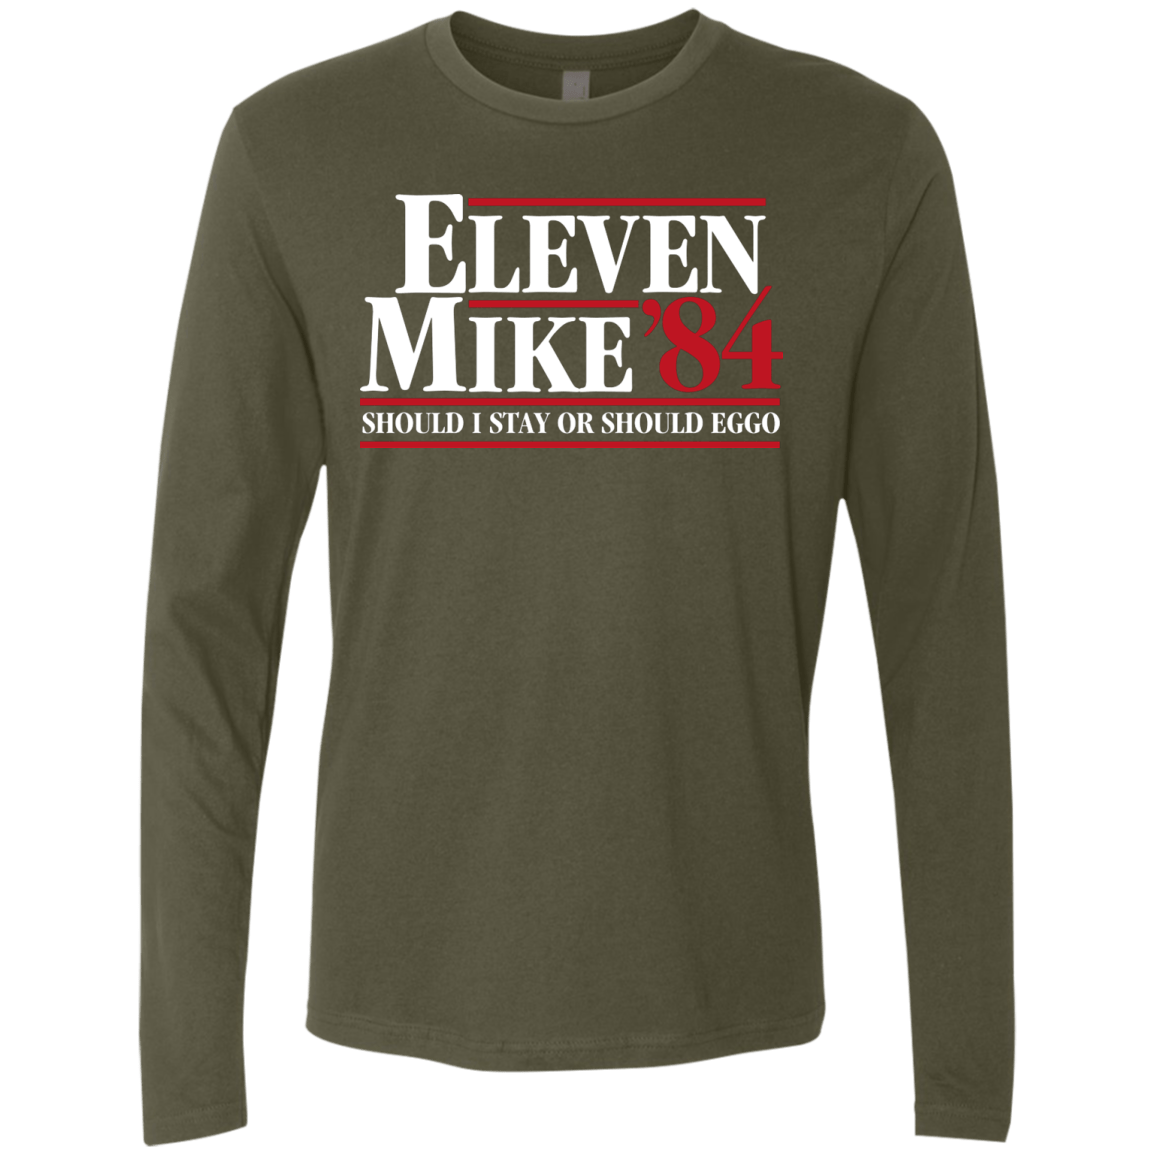 T-Shirts Military Green / Small Eleven Mike 84 - Should I Stay or Should Eggo Men's Premium Long Sleeve